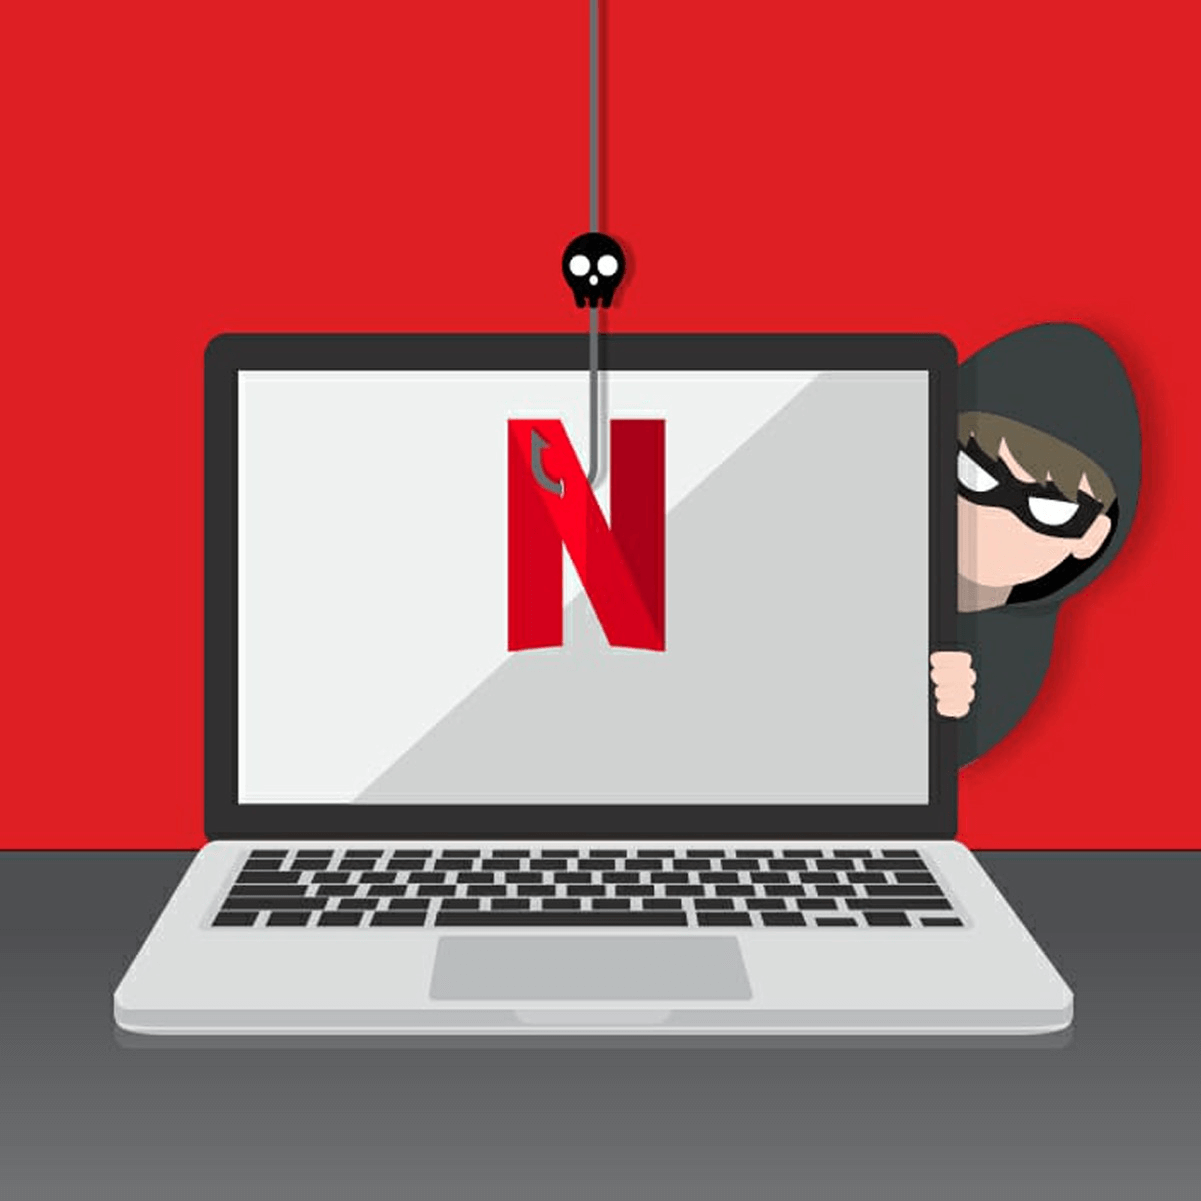 How to recognize phishing/suspicious email on Netflix